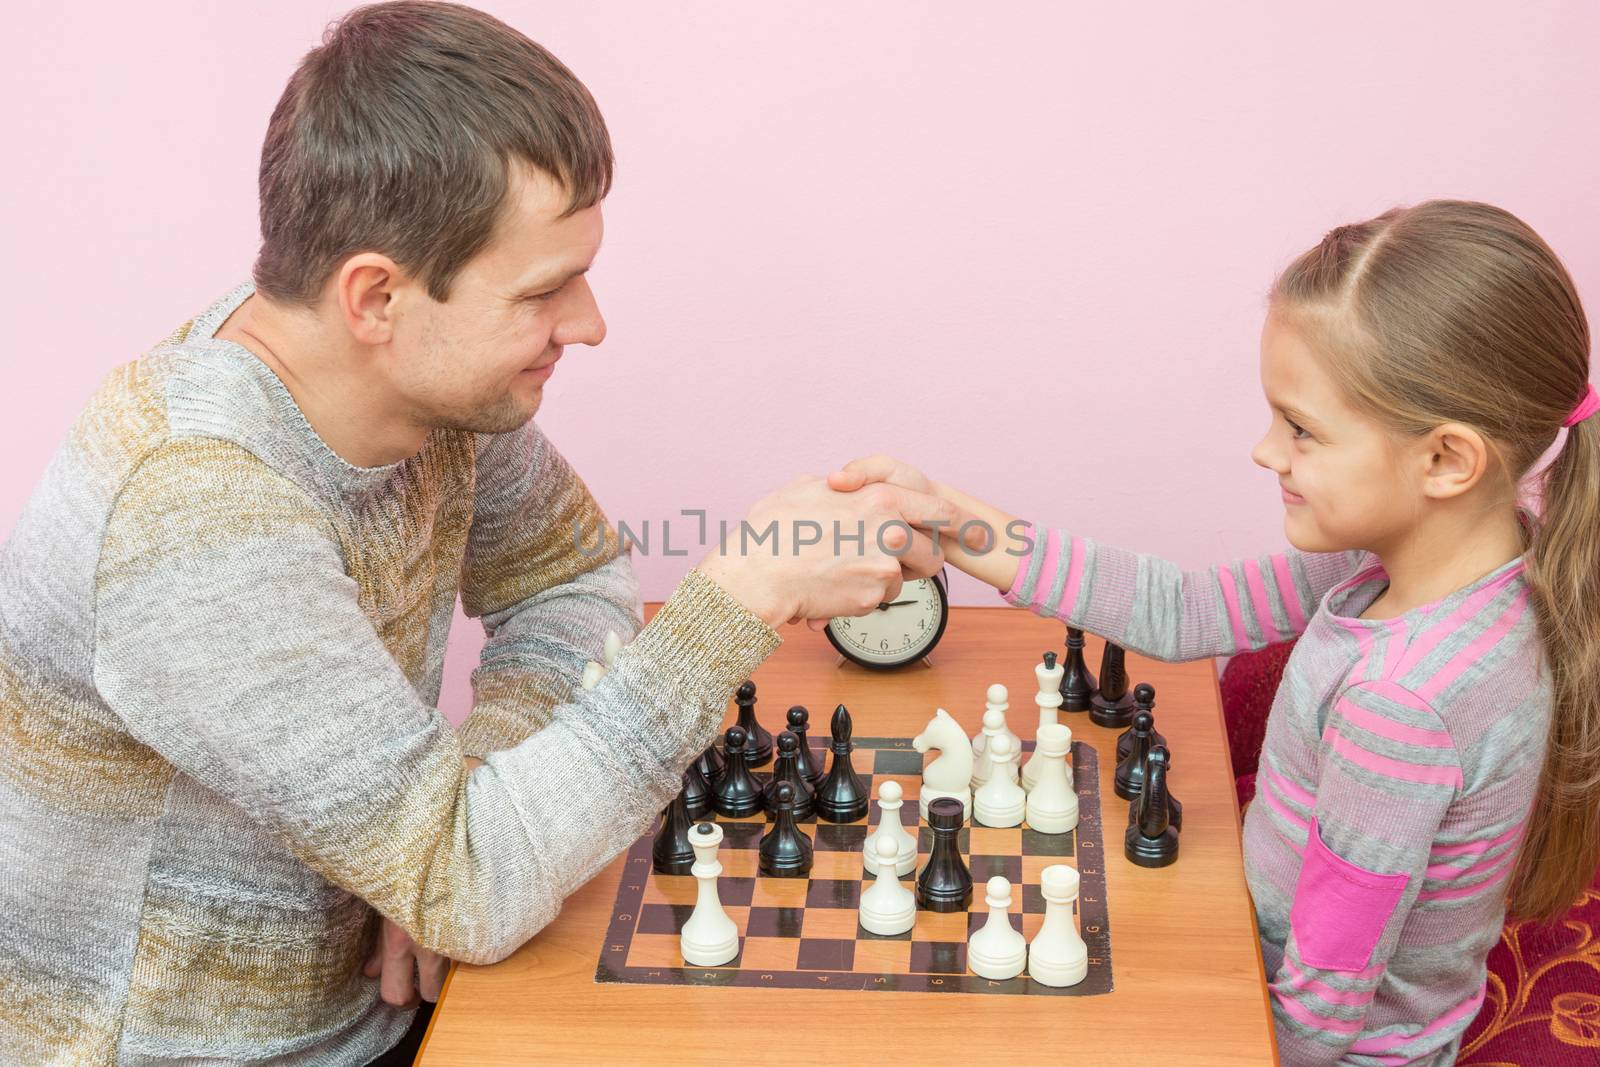 Dad and daughter shook hands, playing a game of chess by Madhourse